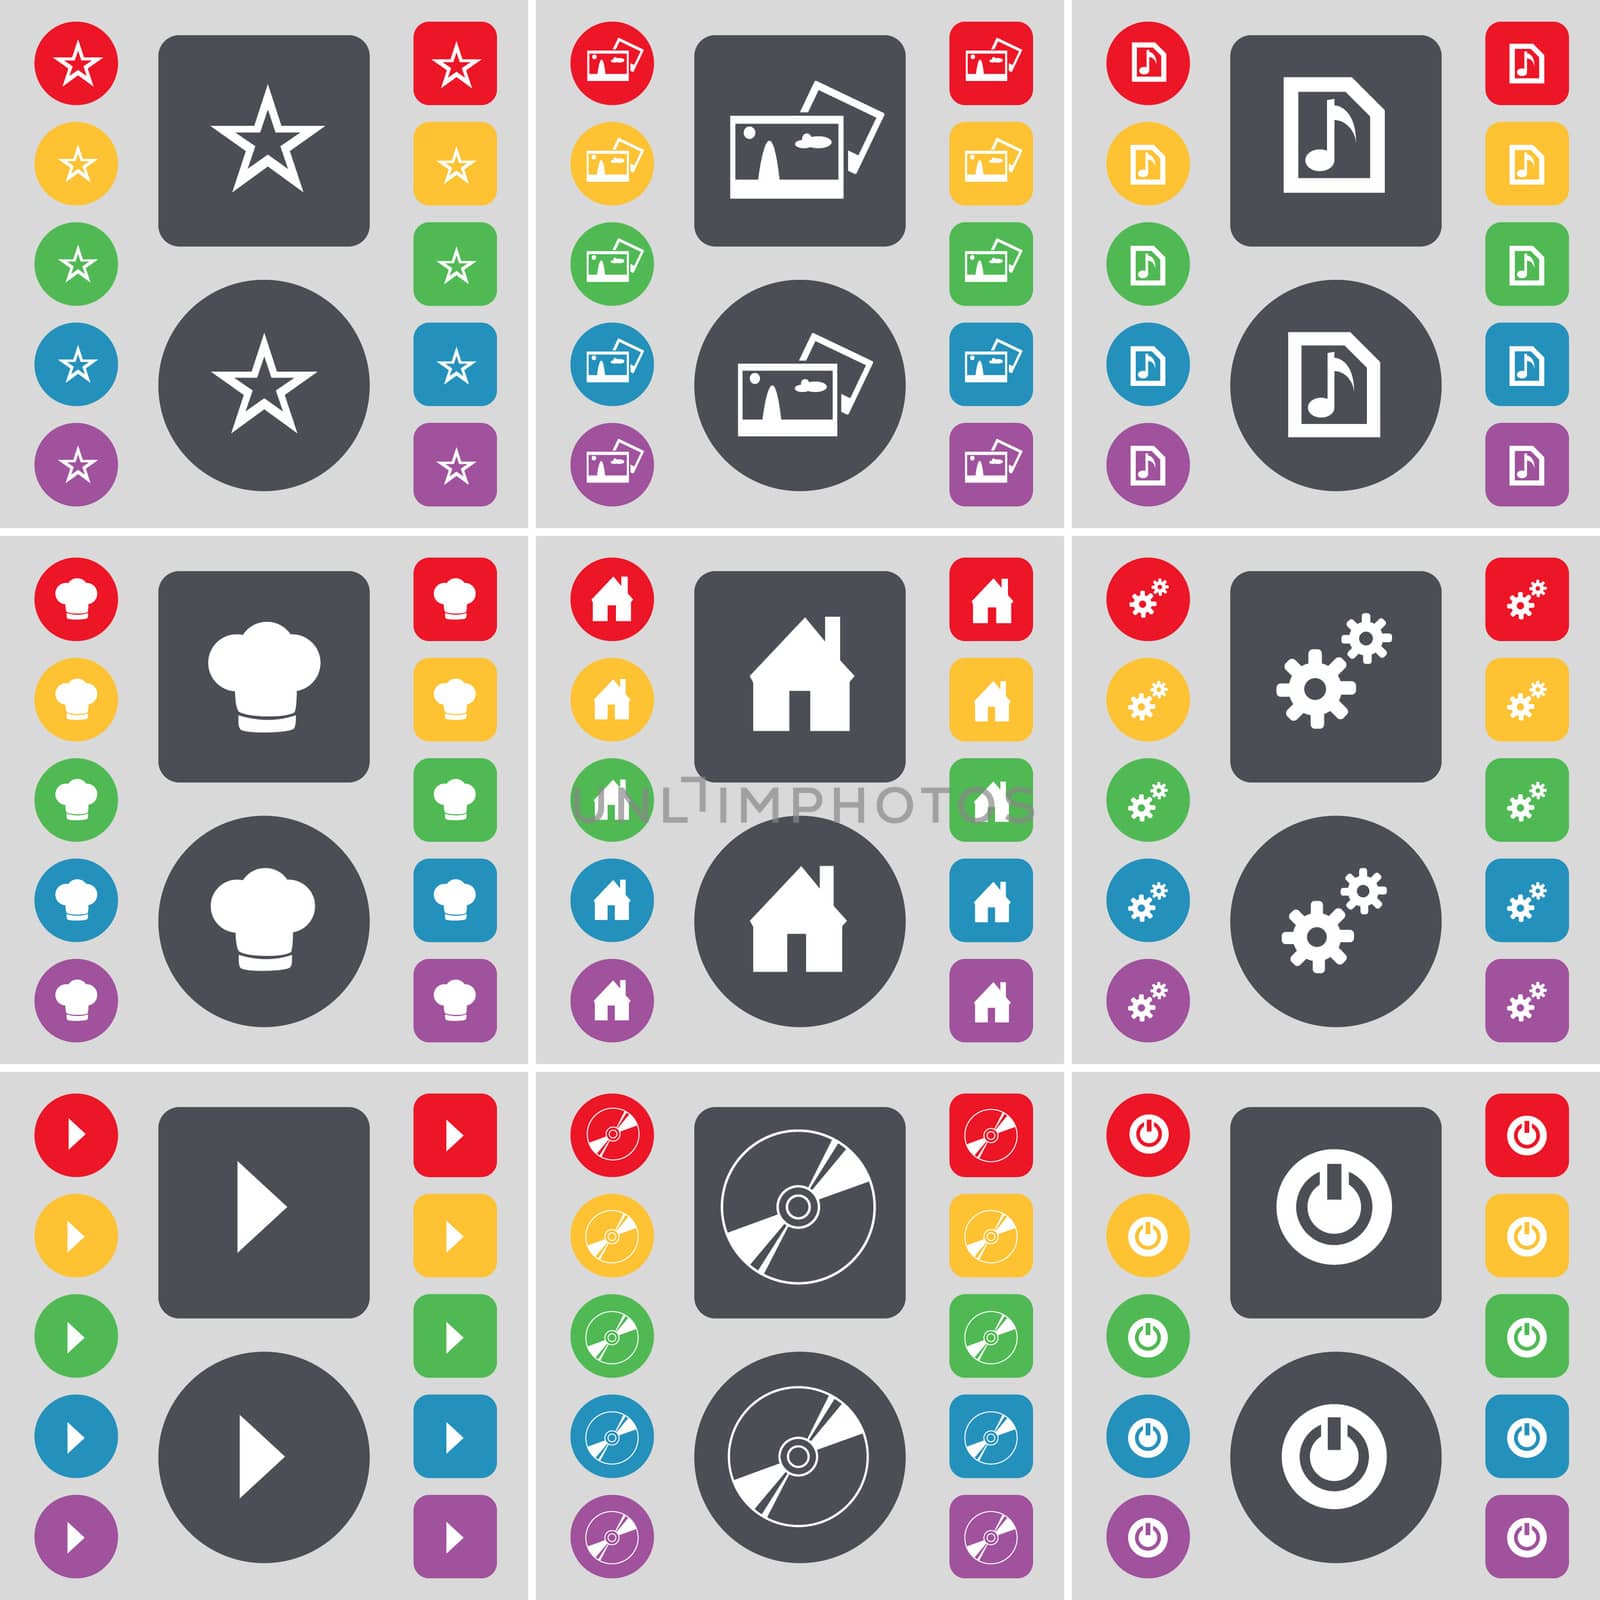 Star, Picture, Music file, Cooking hat, House, Gear, Media play, Disk, Power icon symbol. A large set of flat, colored buttons for your design. illustration